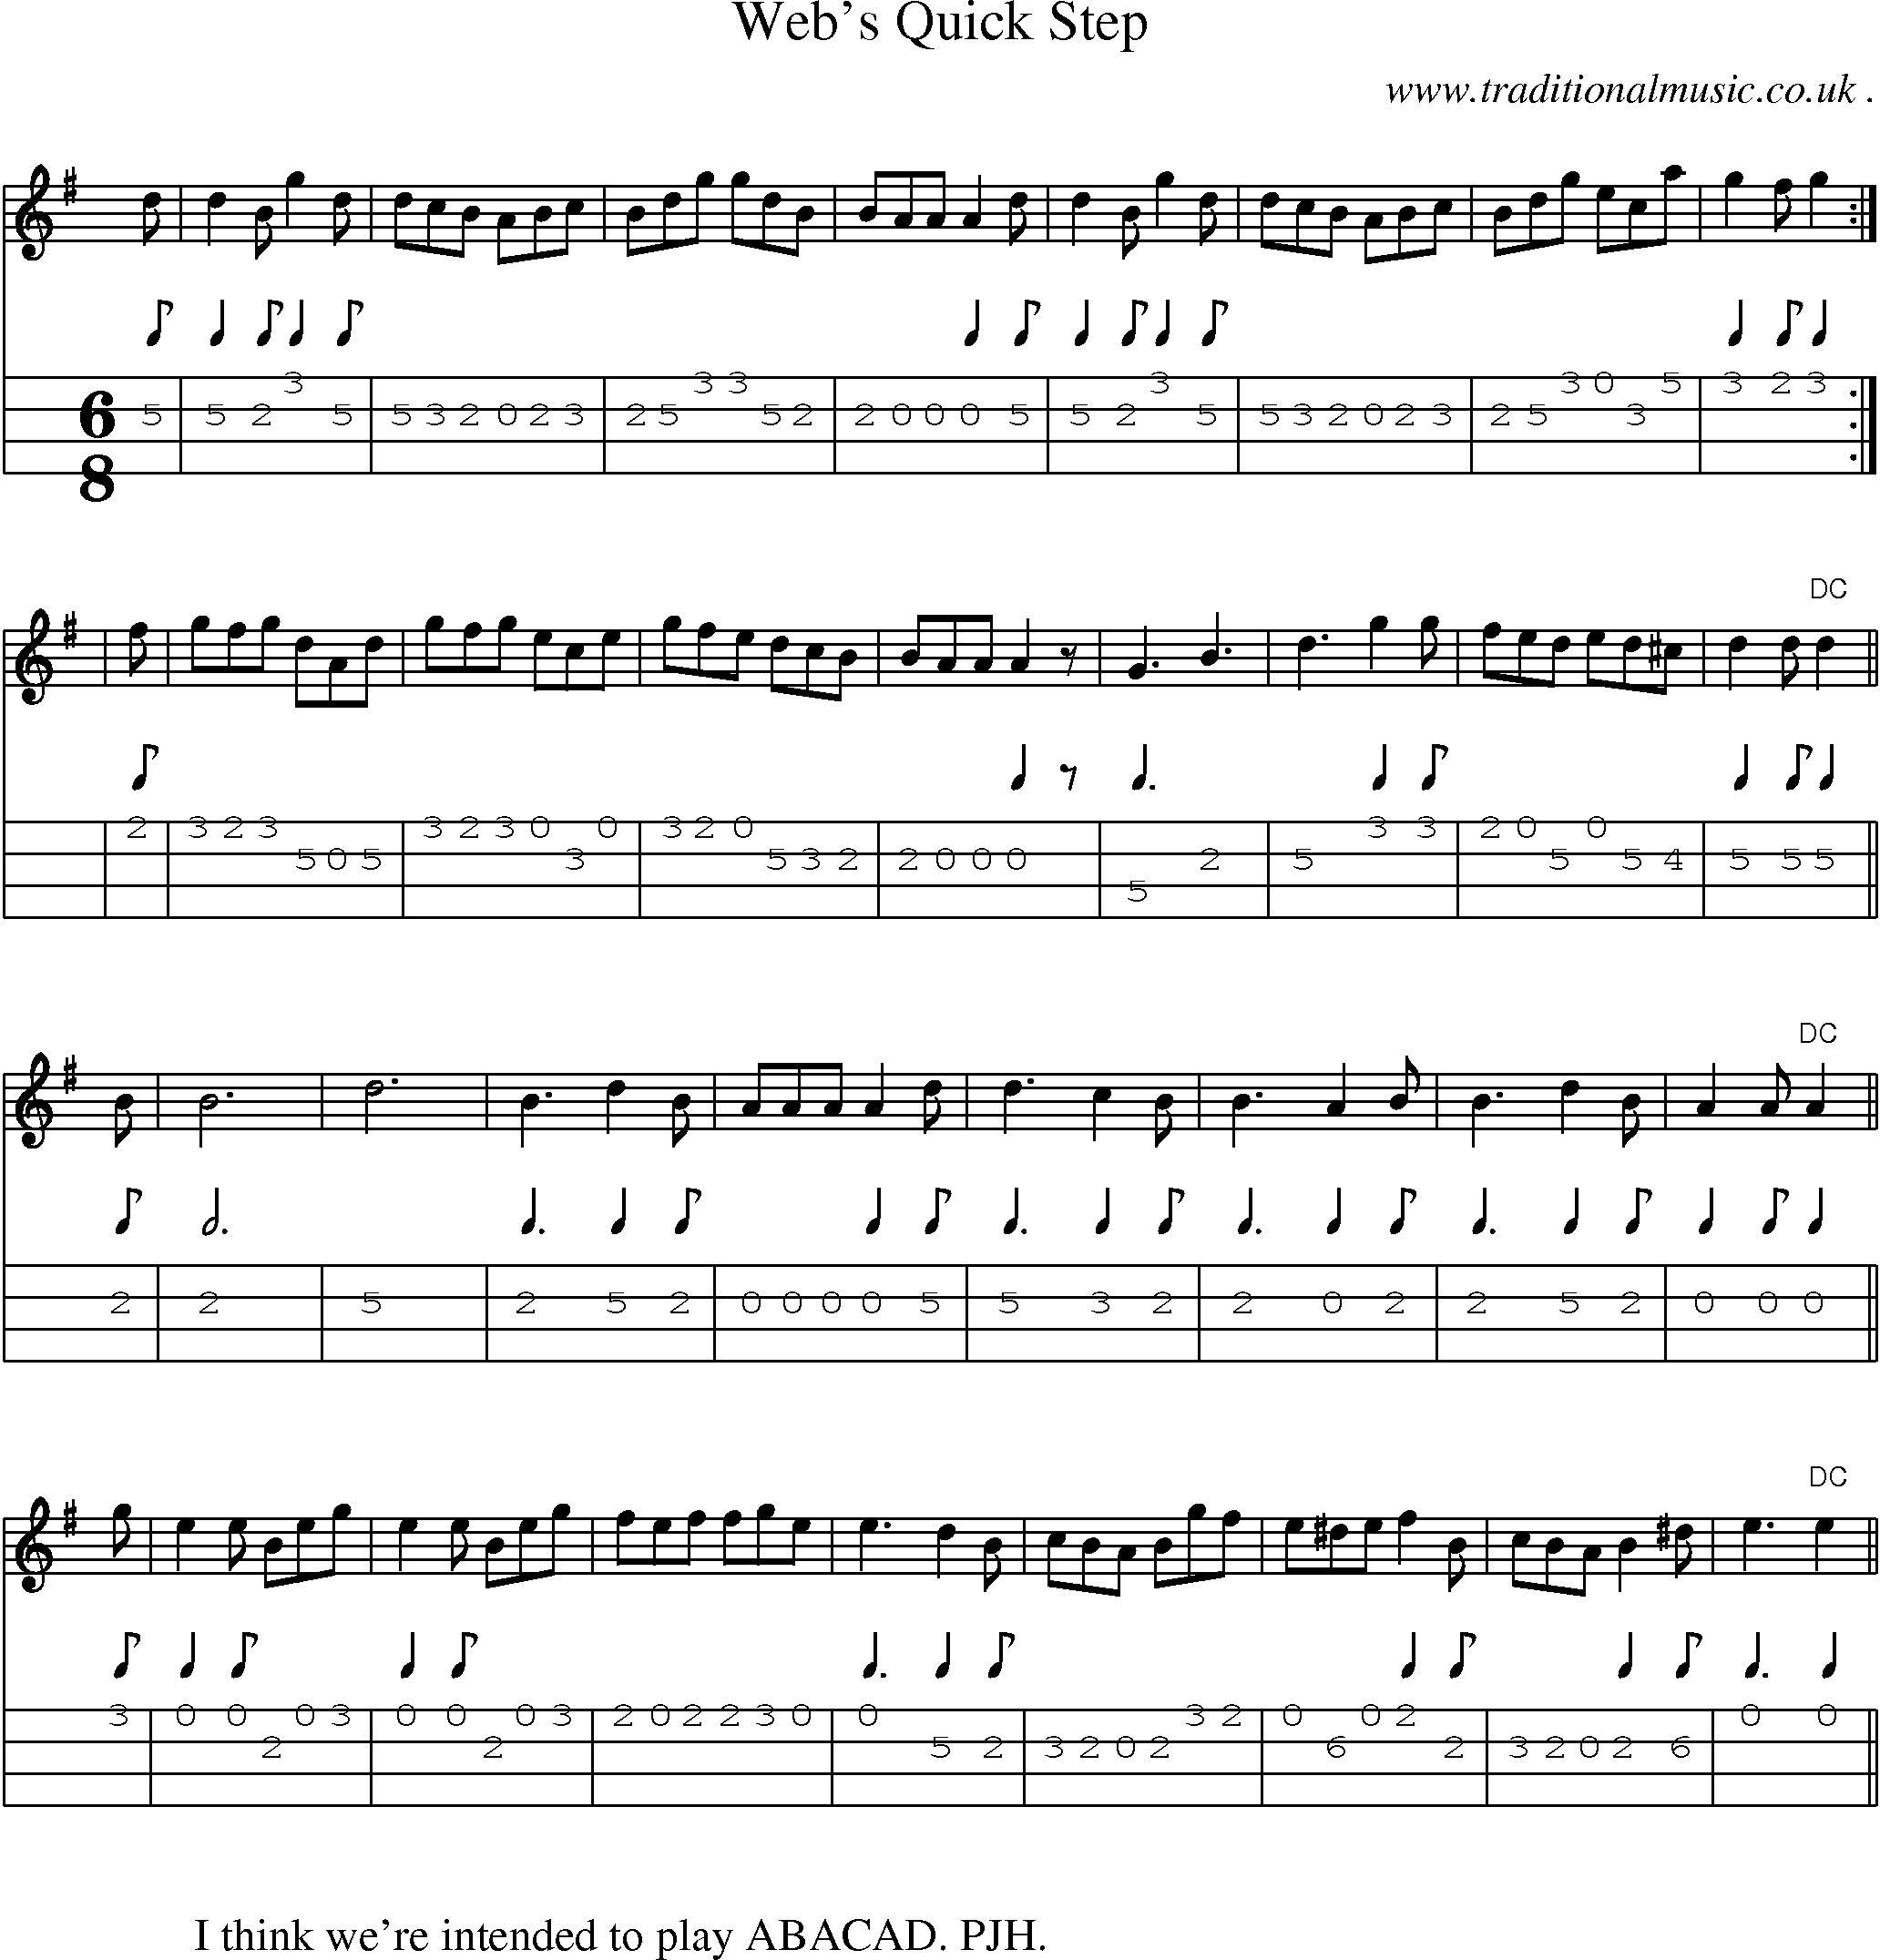 Sheet-Music and Mandolin Tabs for Webs Quick Step